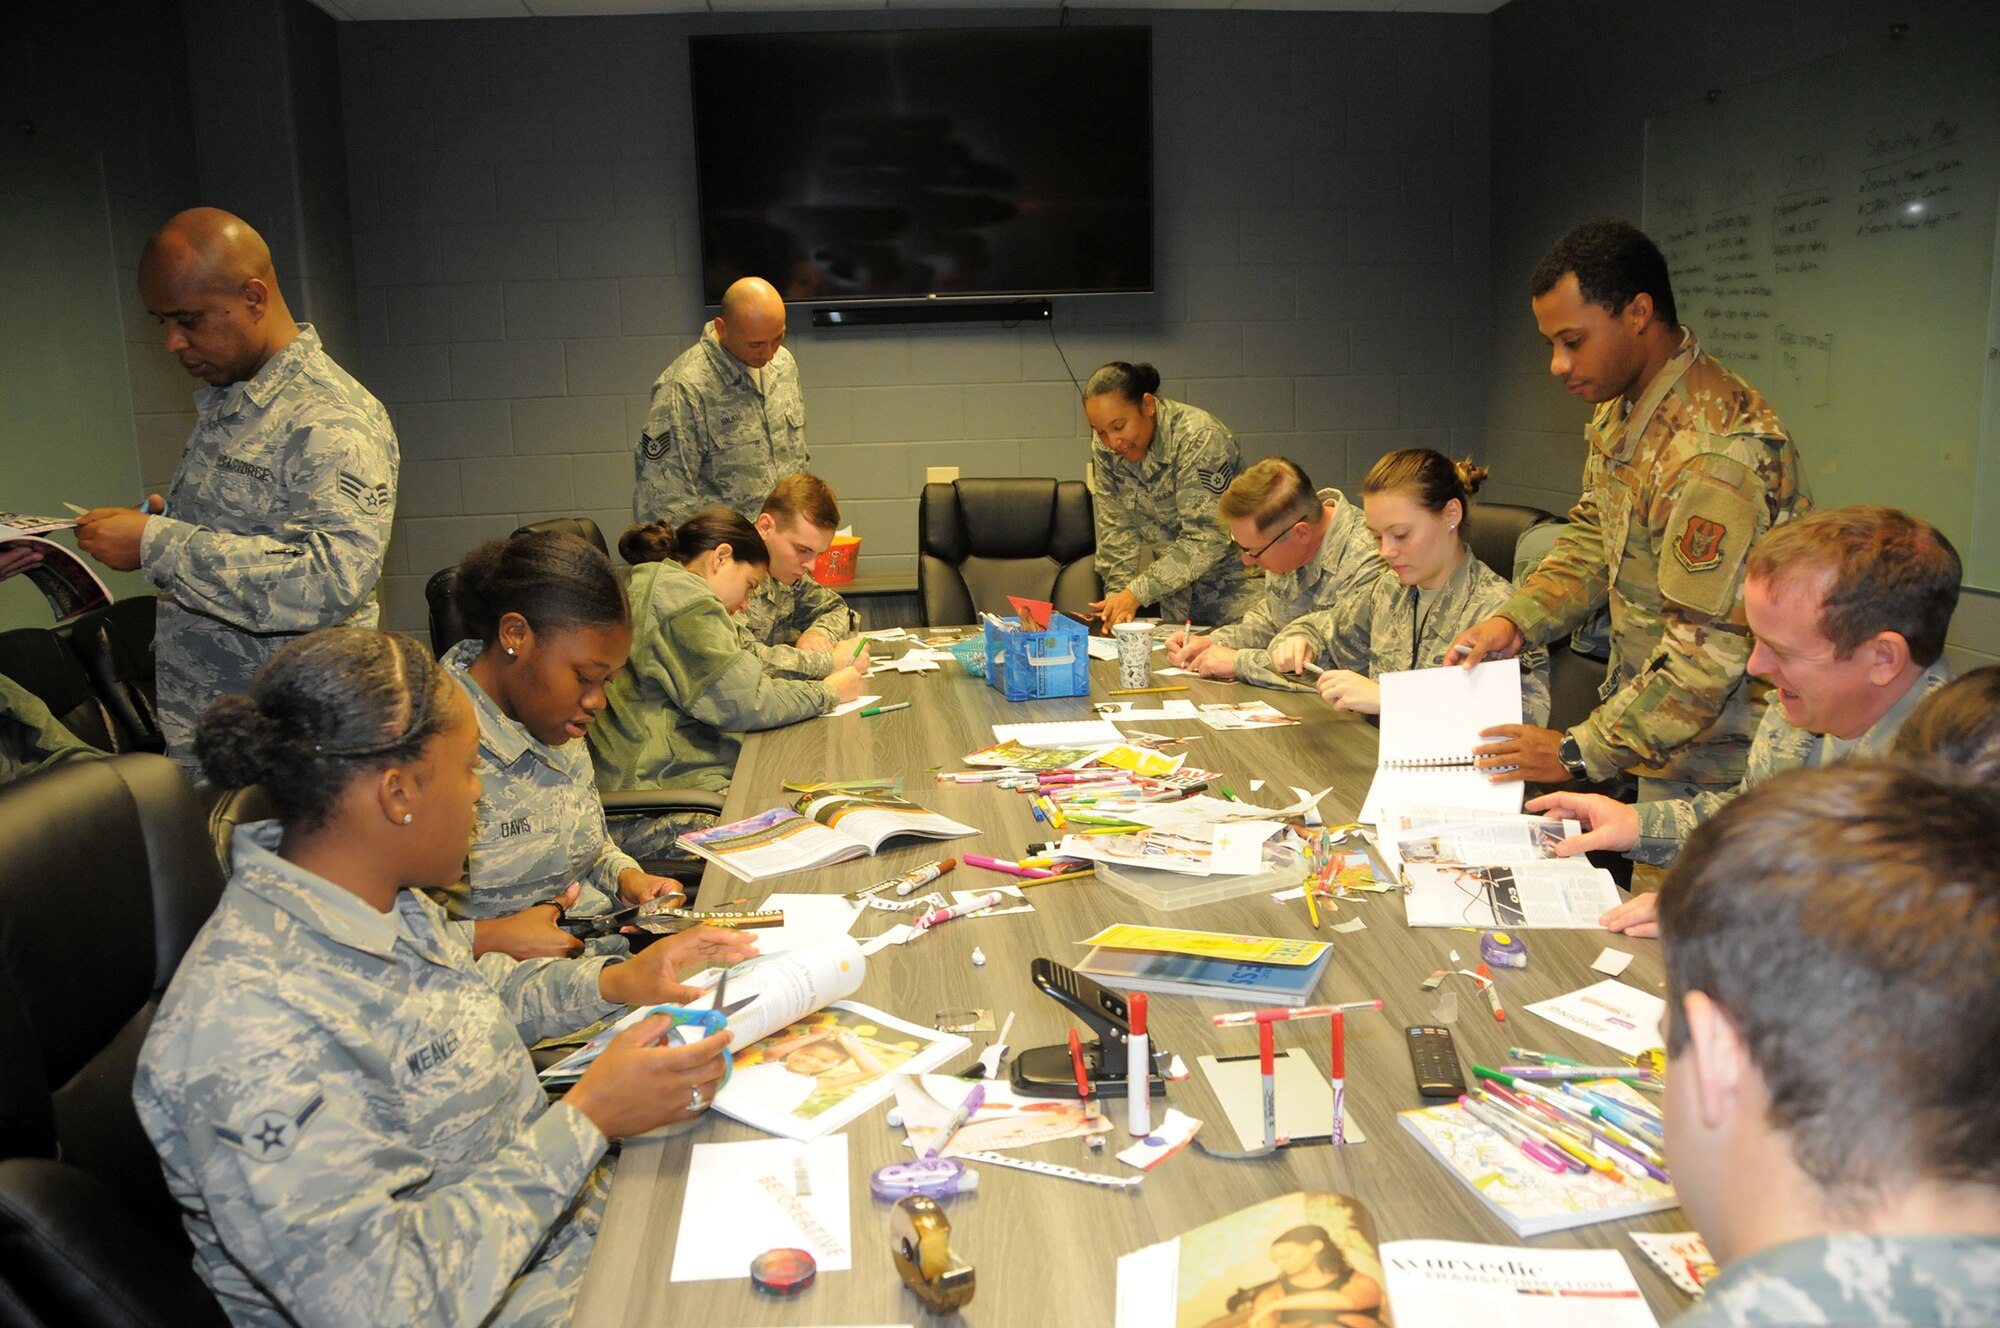 Members of the 445th Force Support Squadron construct vision boards of goals they would like to accomplish within the next year as part of their tactical pause day Nov. 3, 2019.